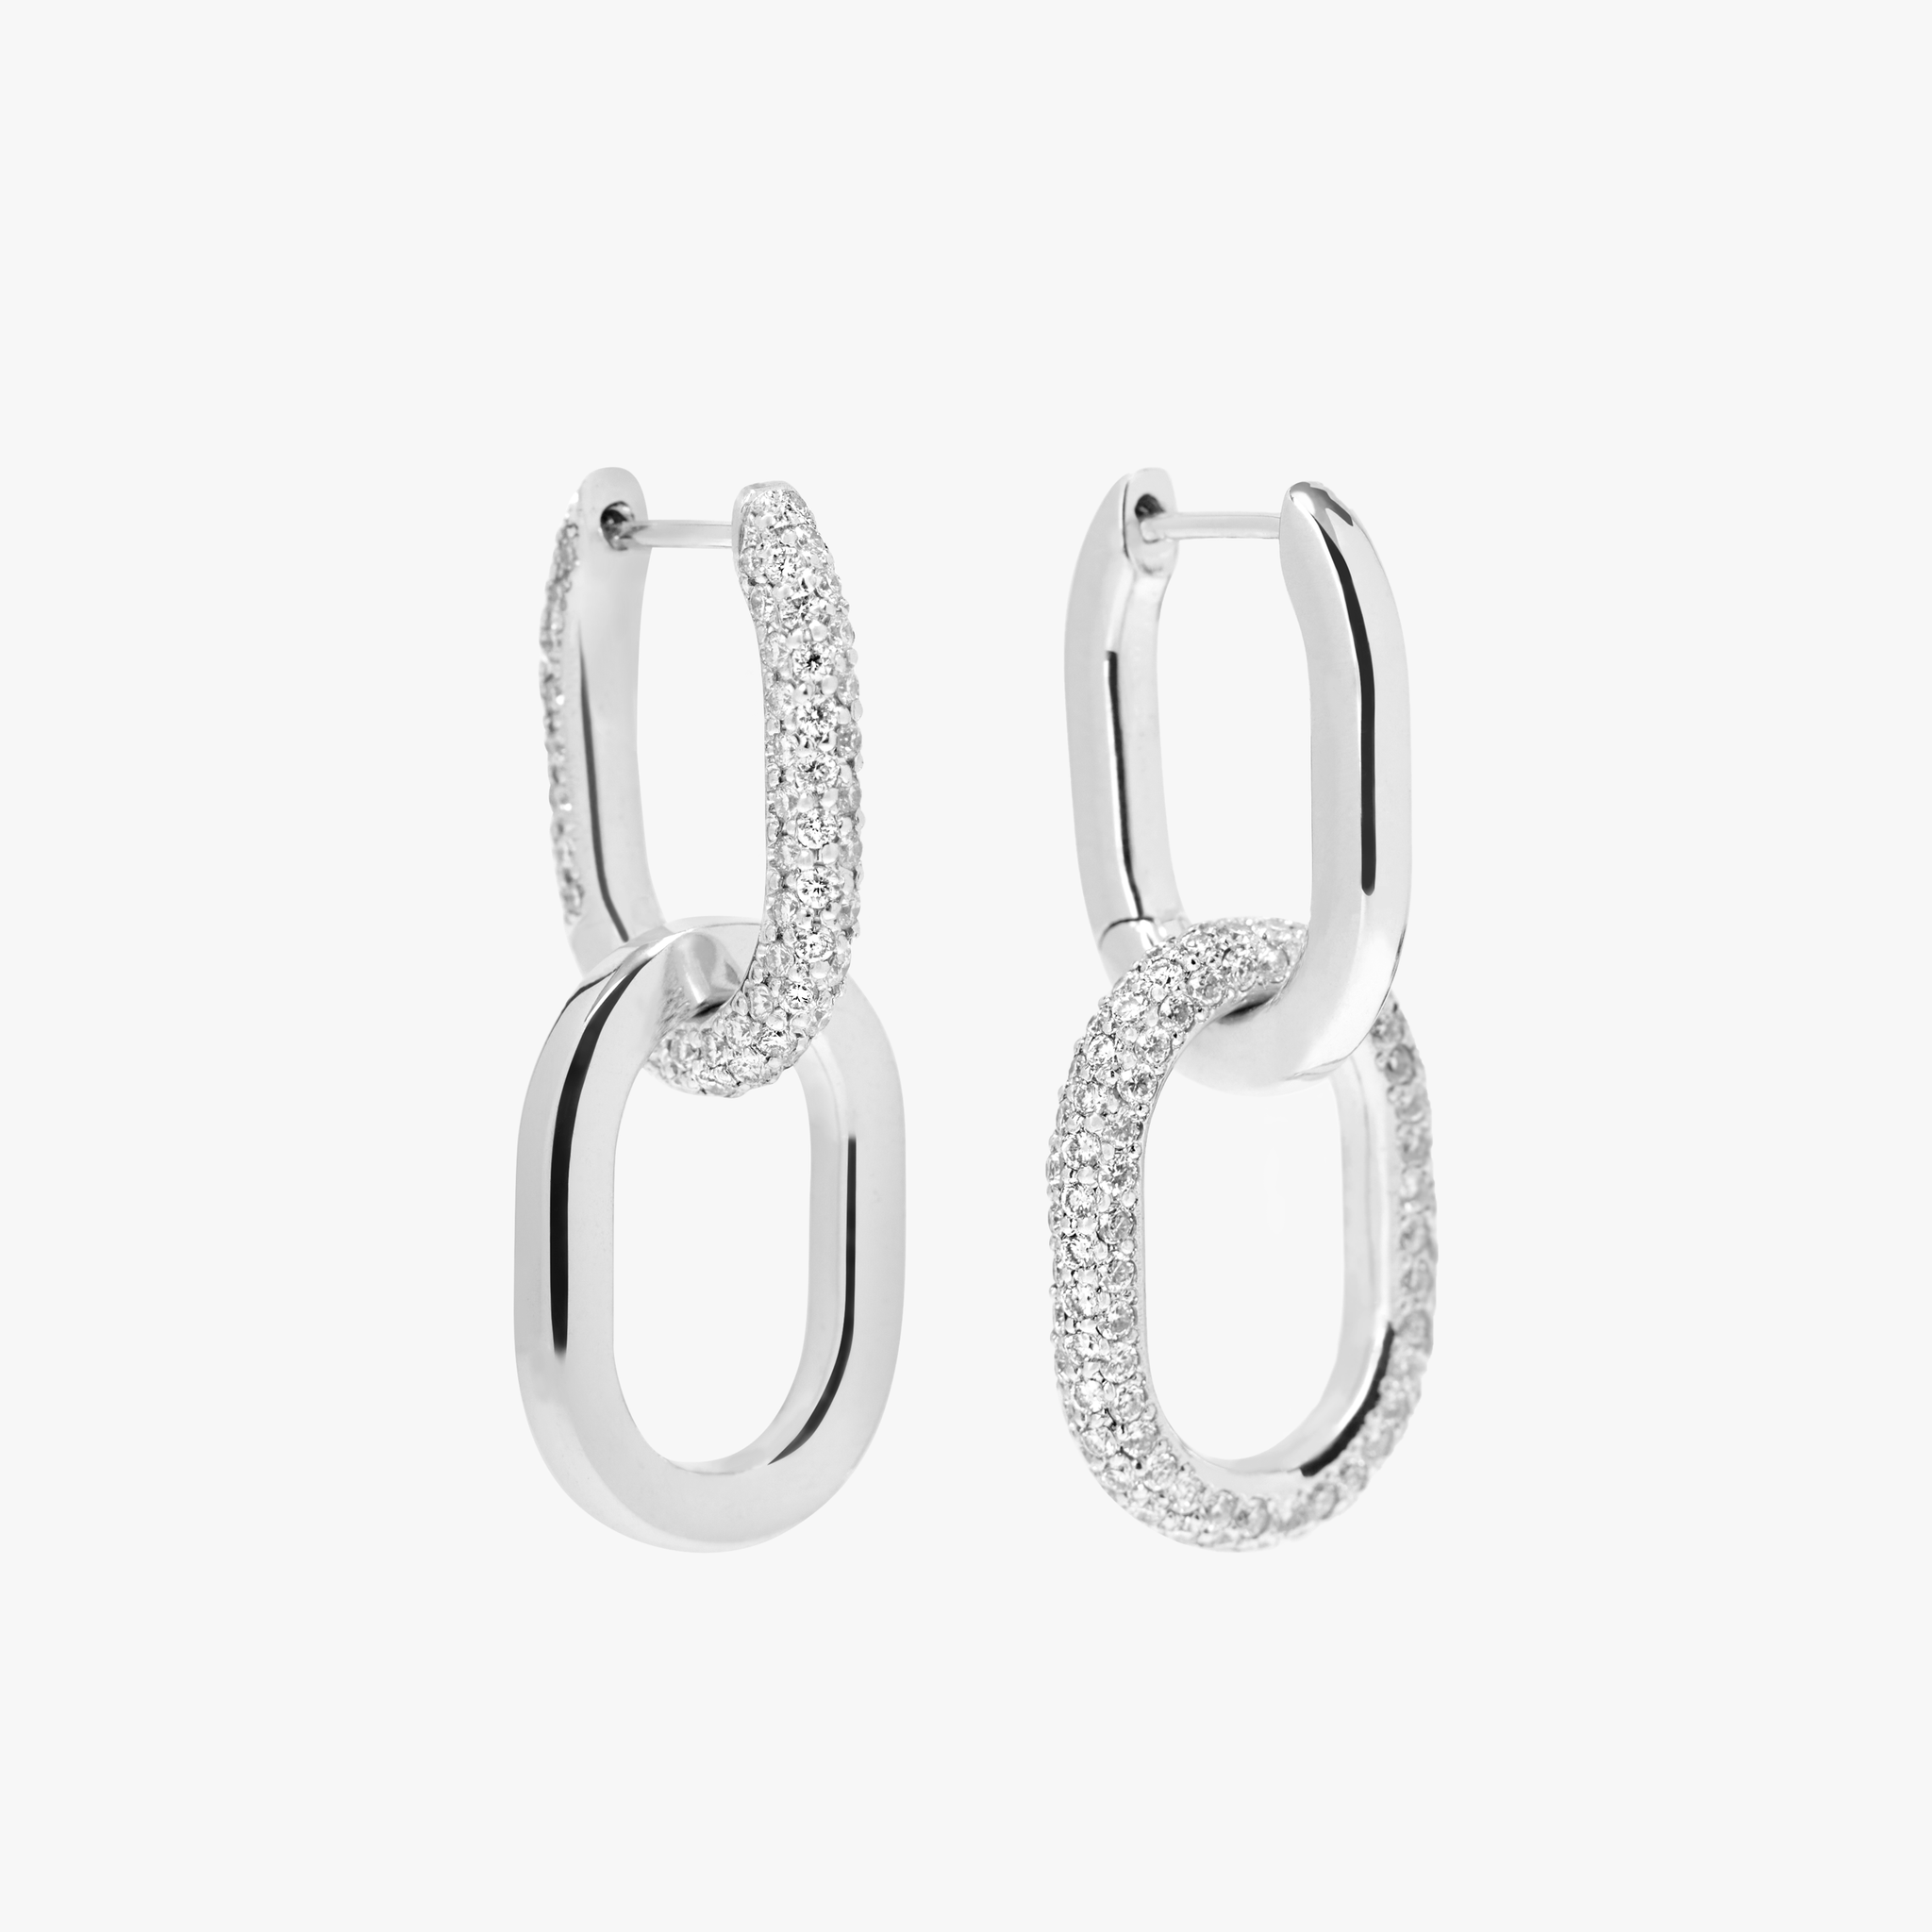 These Ecluse double link earrings focus on modularity - the ability to mix and rearrange for any occasion. The Dalliance Ecluse Earrings feature over 10 grams of 18k gold and 1.15 total carat weight of diamonds. Earrings are sold as a pair, with complementary diamond / gold links. White Gold shown here. 